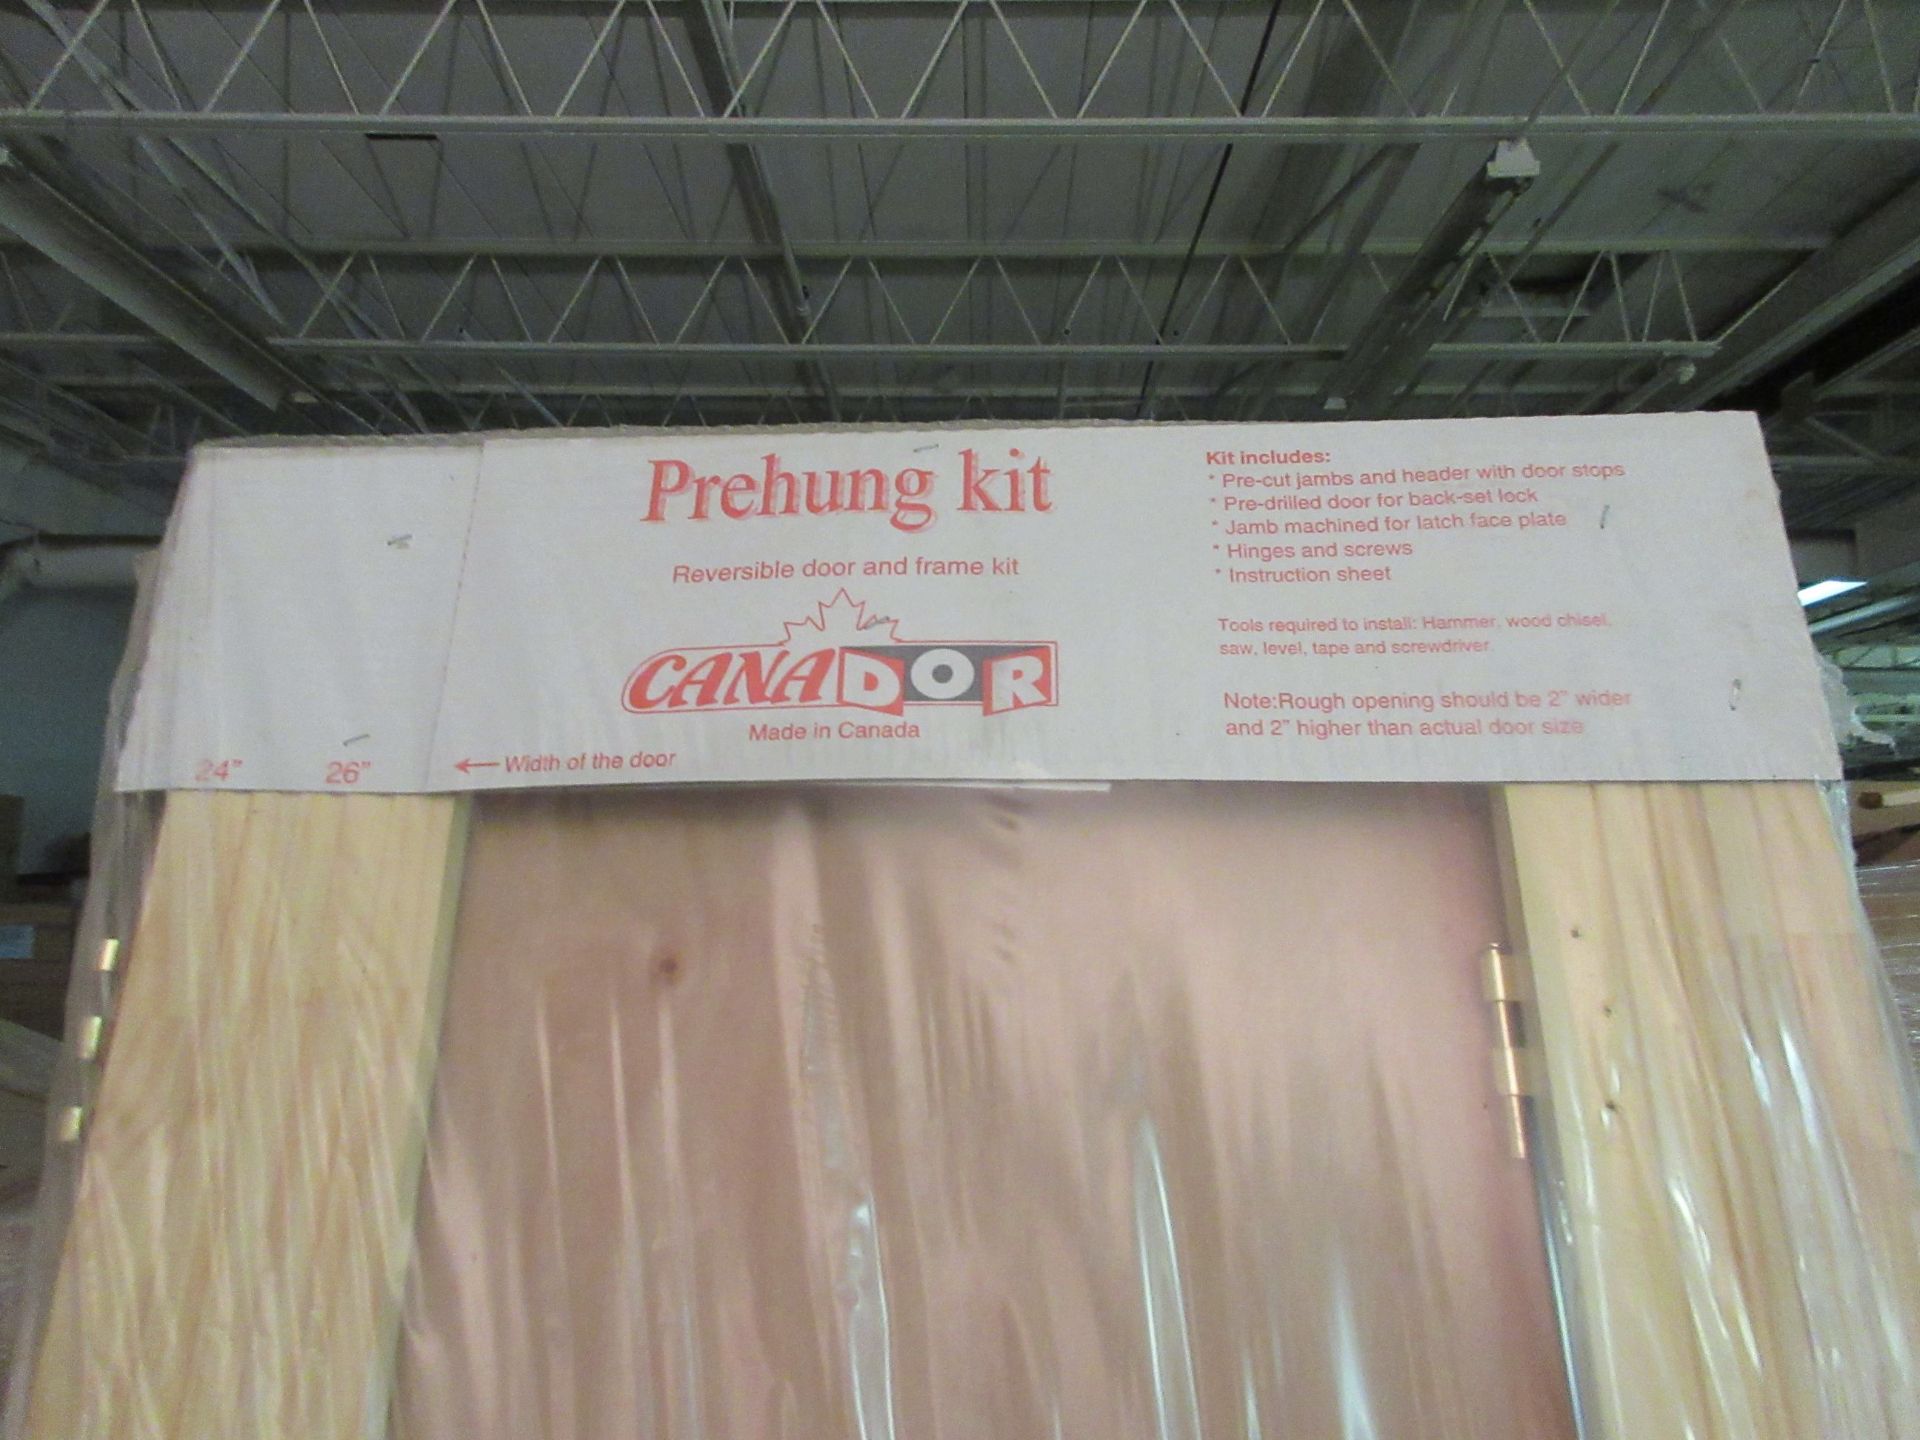 Prehung kit, reversible door and frame kit 26" x 80"x 1 3/8" (qty 20) - Image 2 of 3